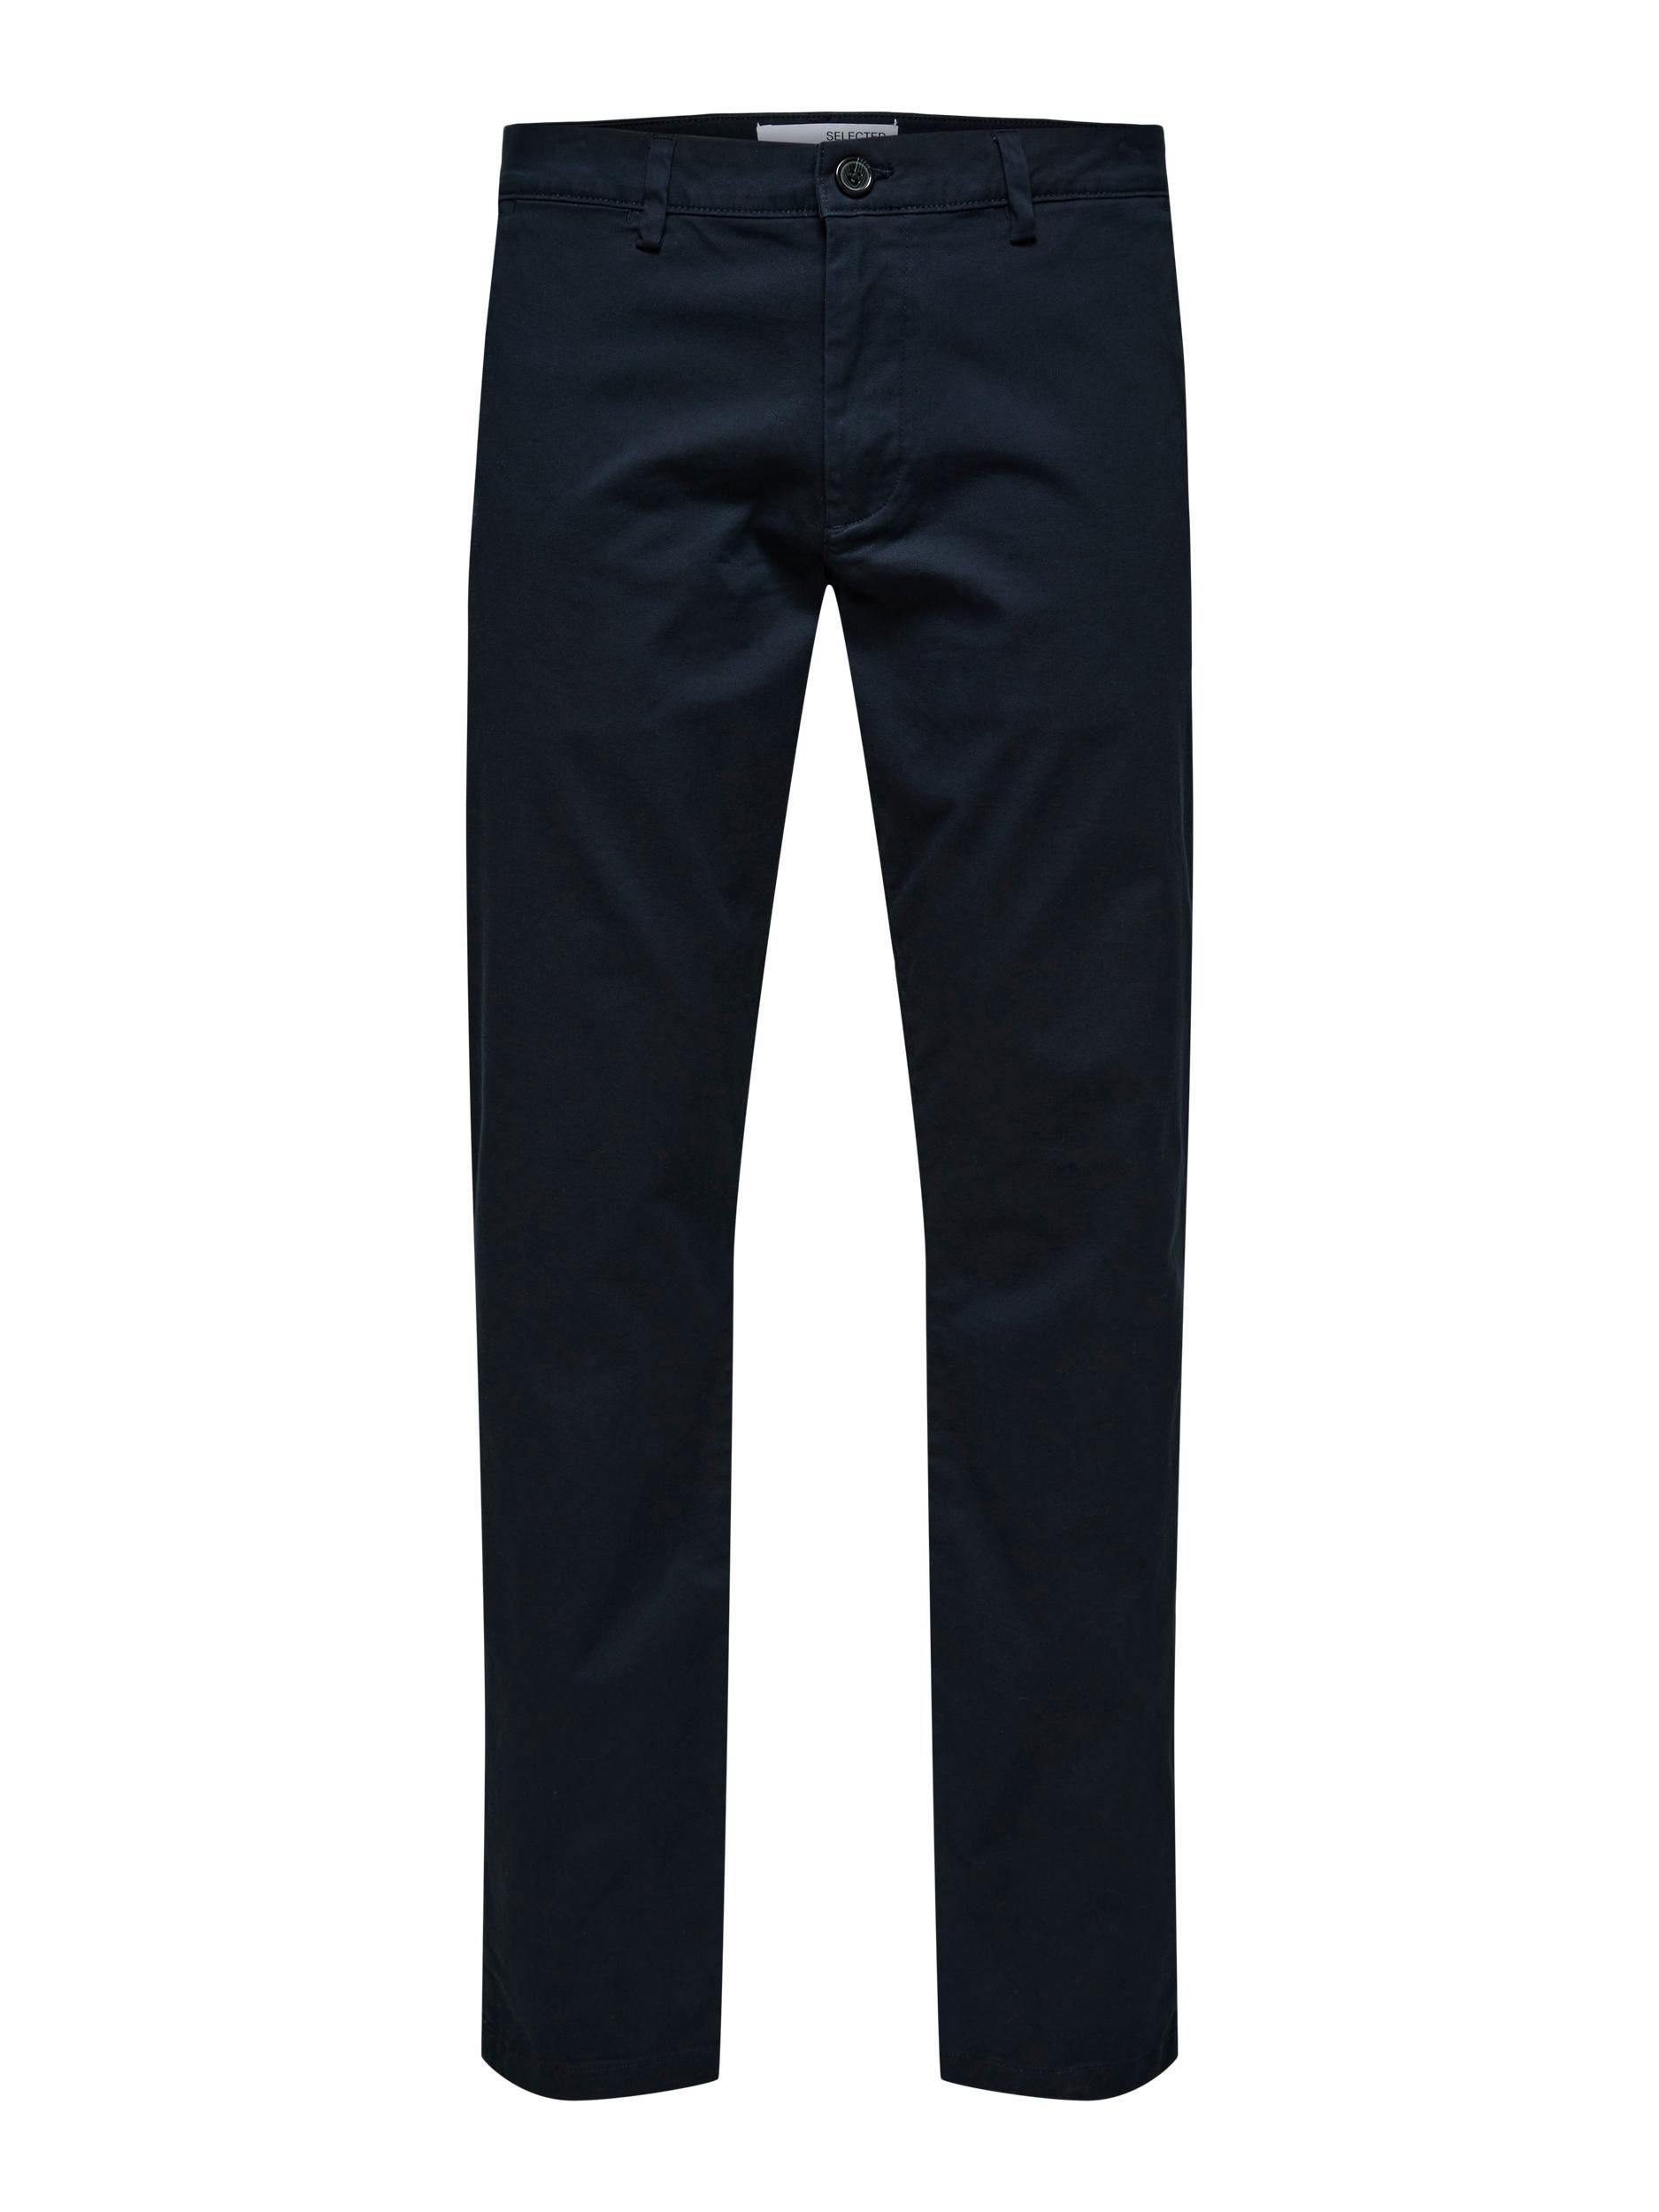 SELECTED HOMME Chinohose Strech dark sapphire